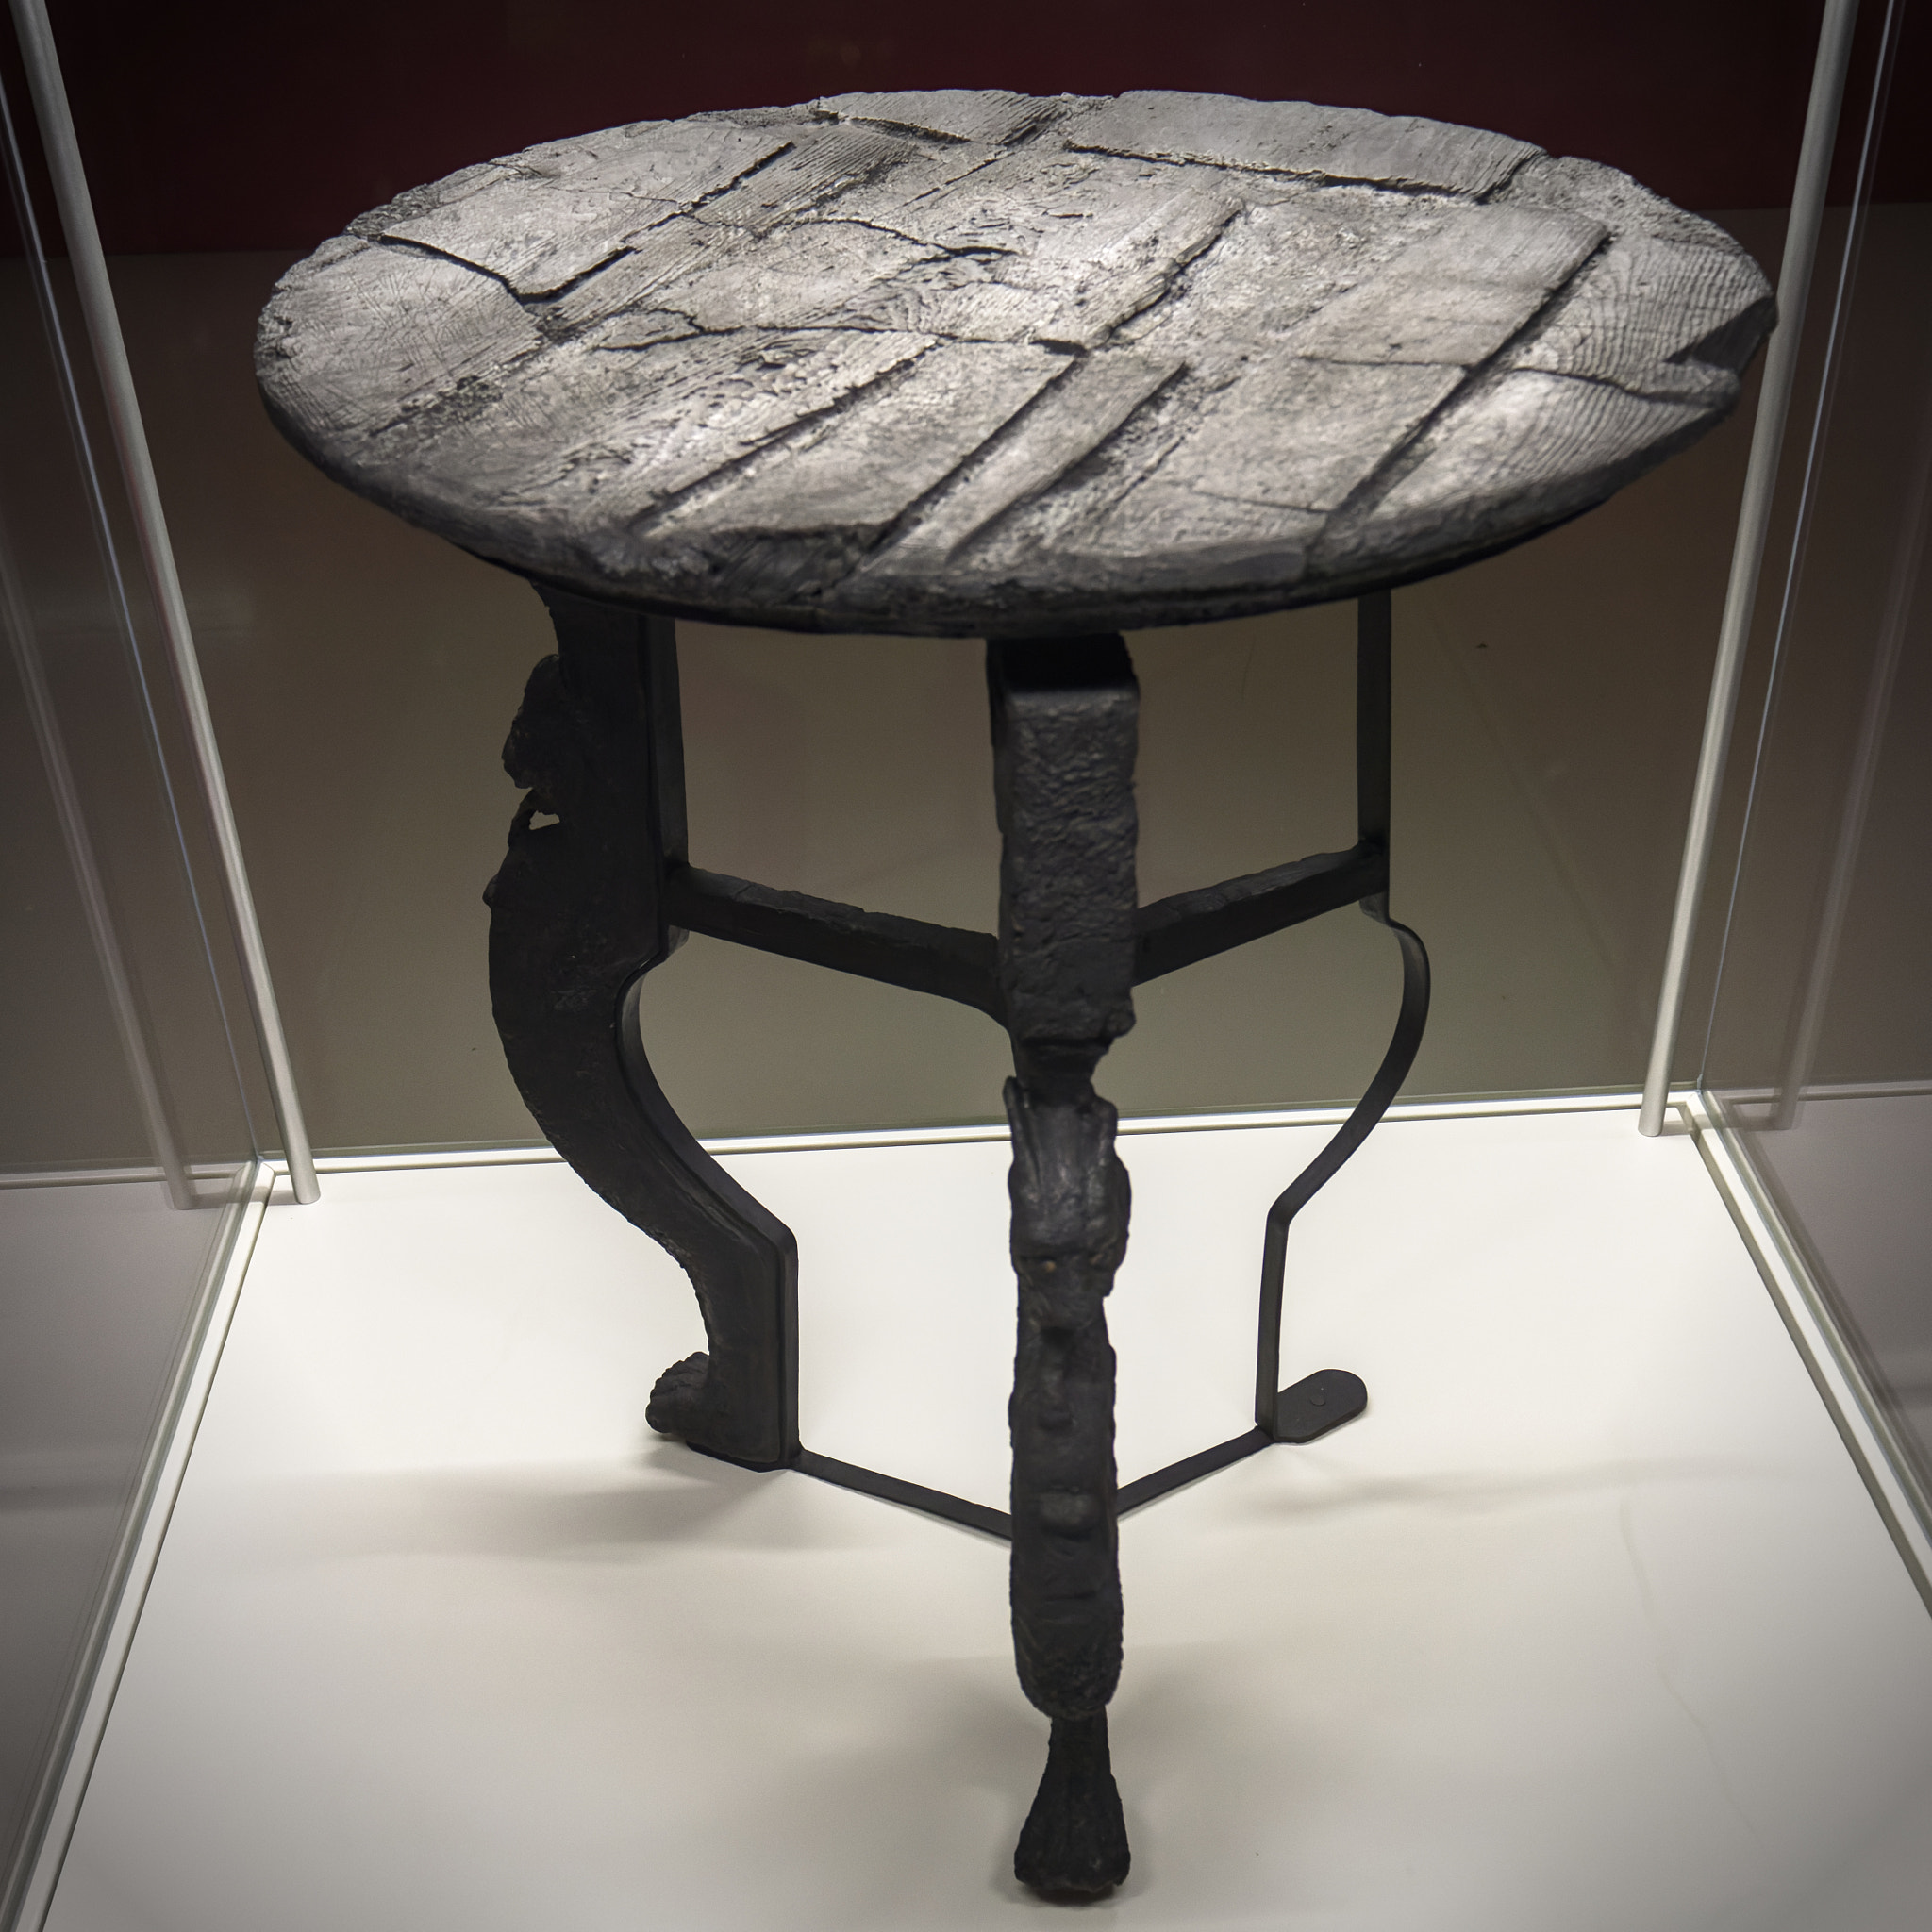 A wooden table found in Pompeii